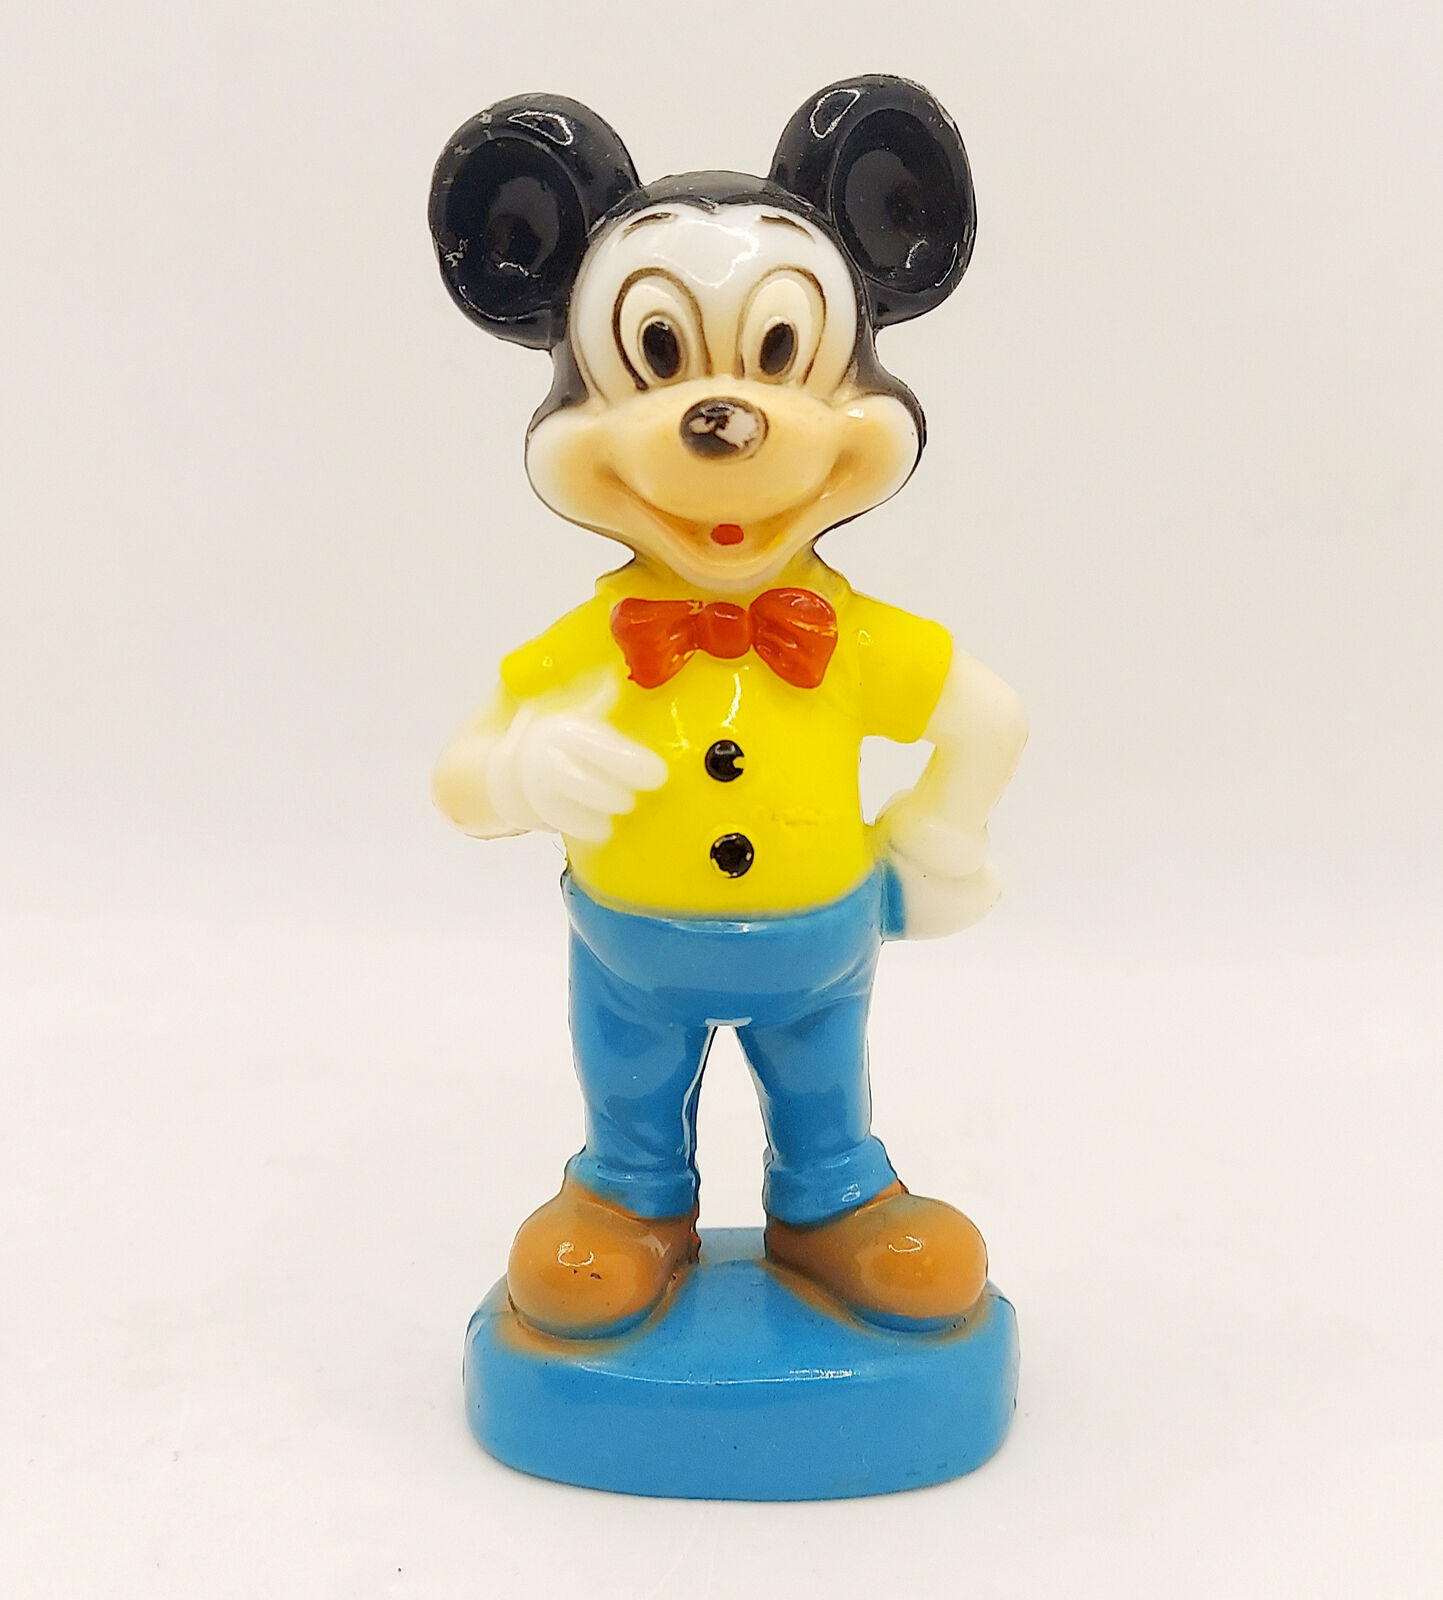 Vintage Plastic Toy Mickey Mouse Figurine Walt Disney Productions Hong Kong